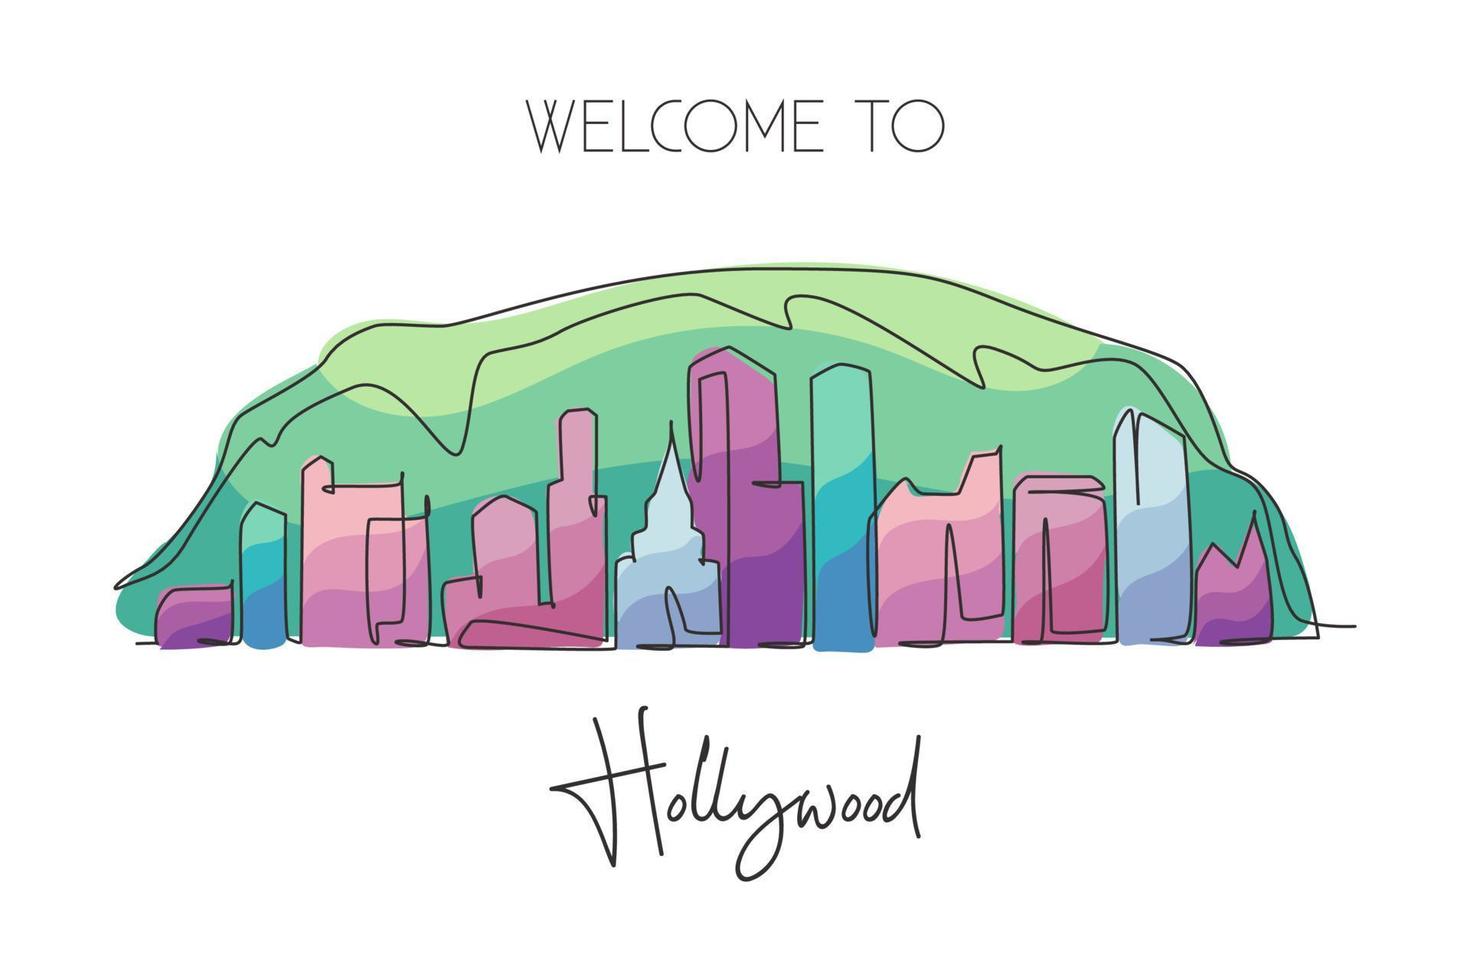 One continuous line drawing of Hollywood city skyline, Los Angeles. Beautiful landmark. World landscape tourism travel home wall decor poster print. Stylish single line draw design vector illustration